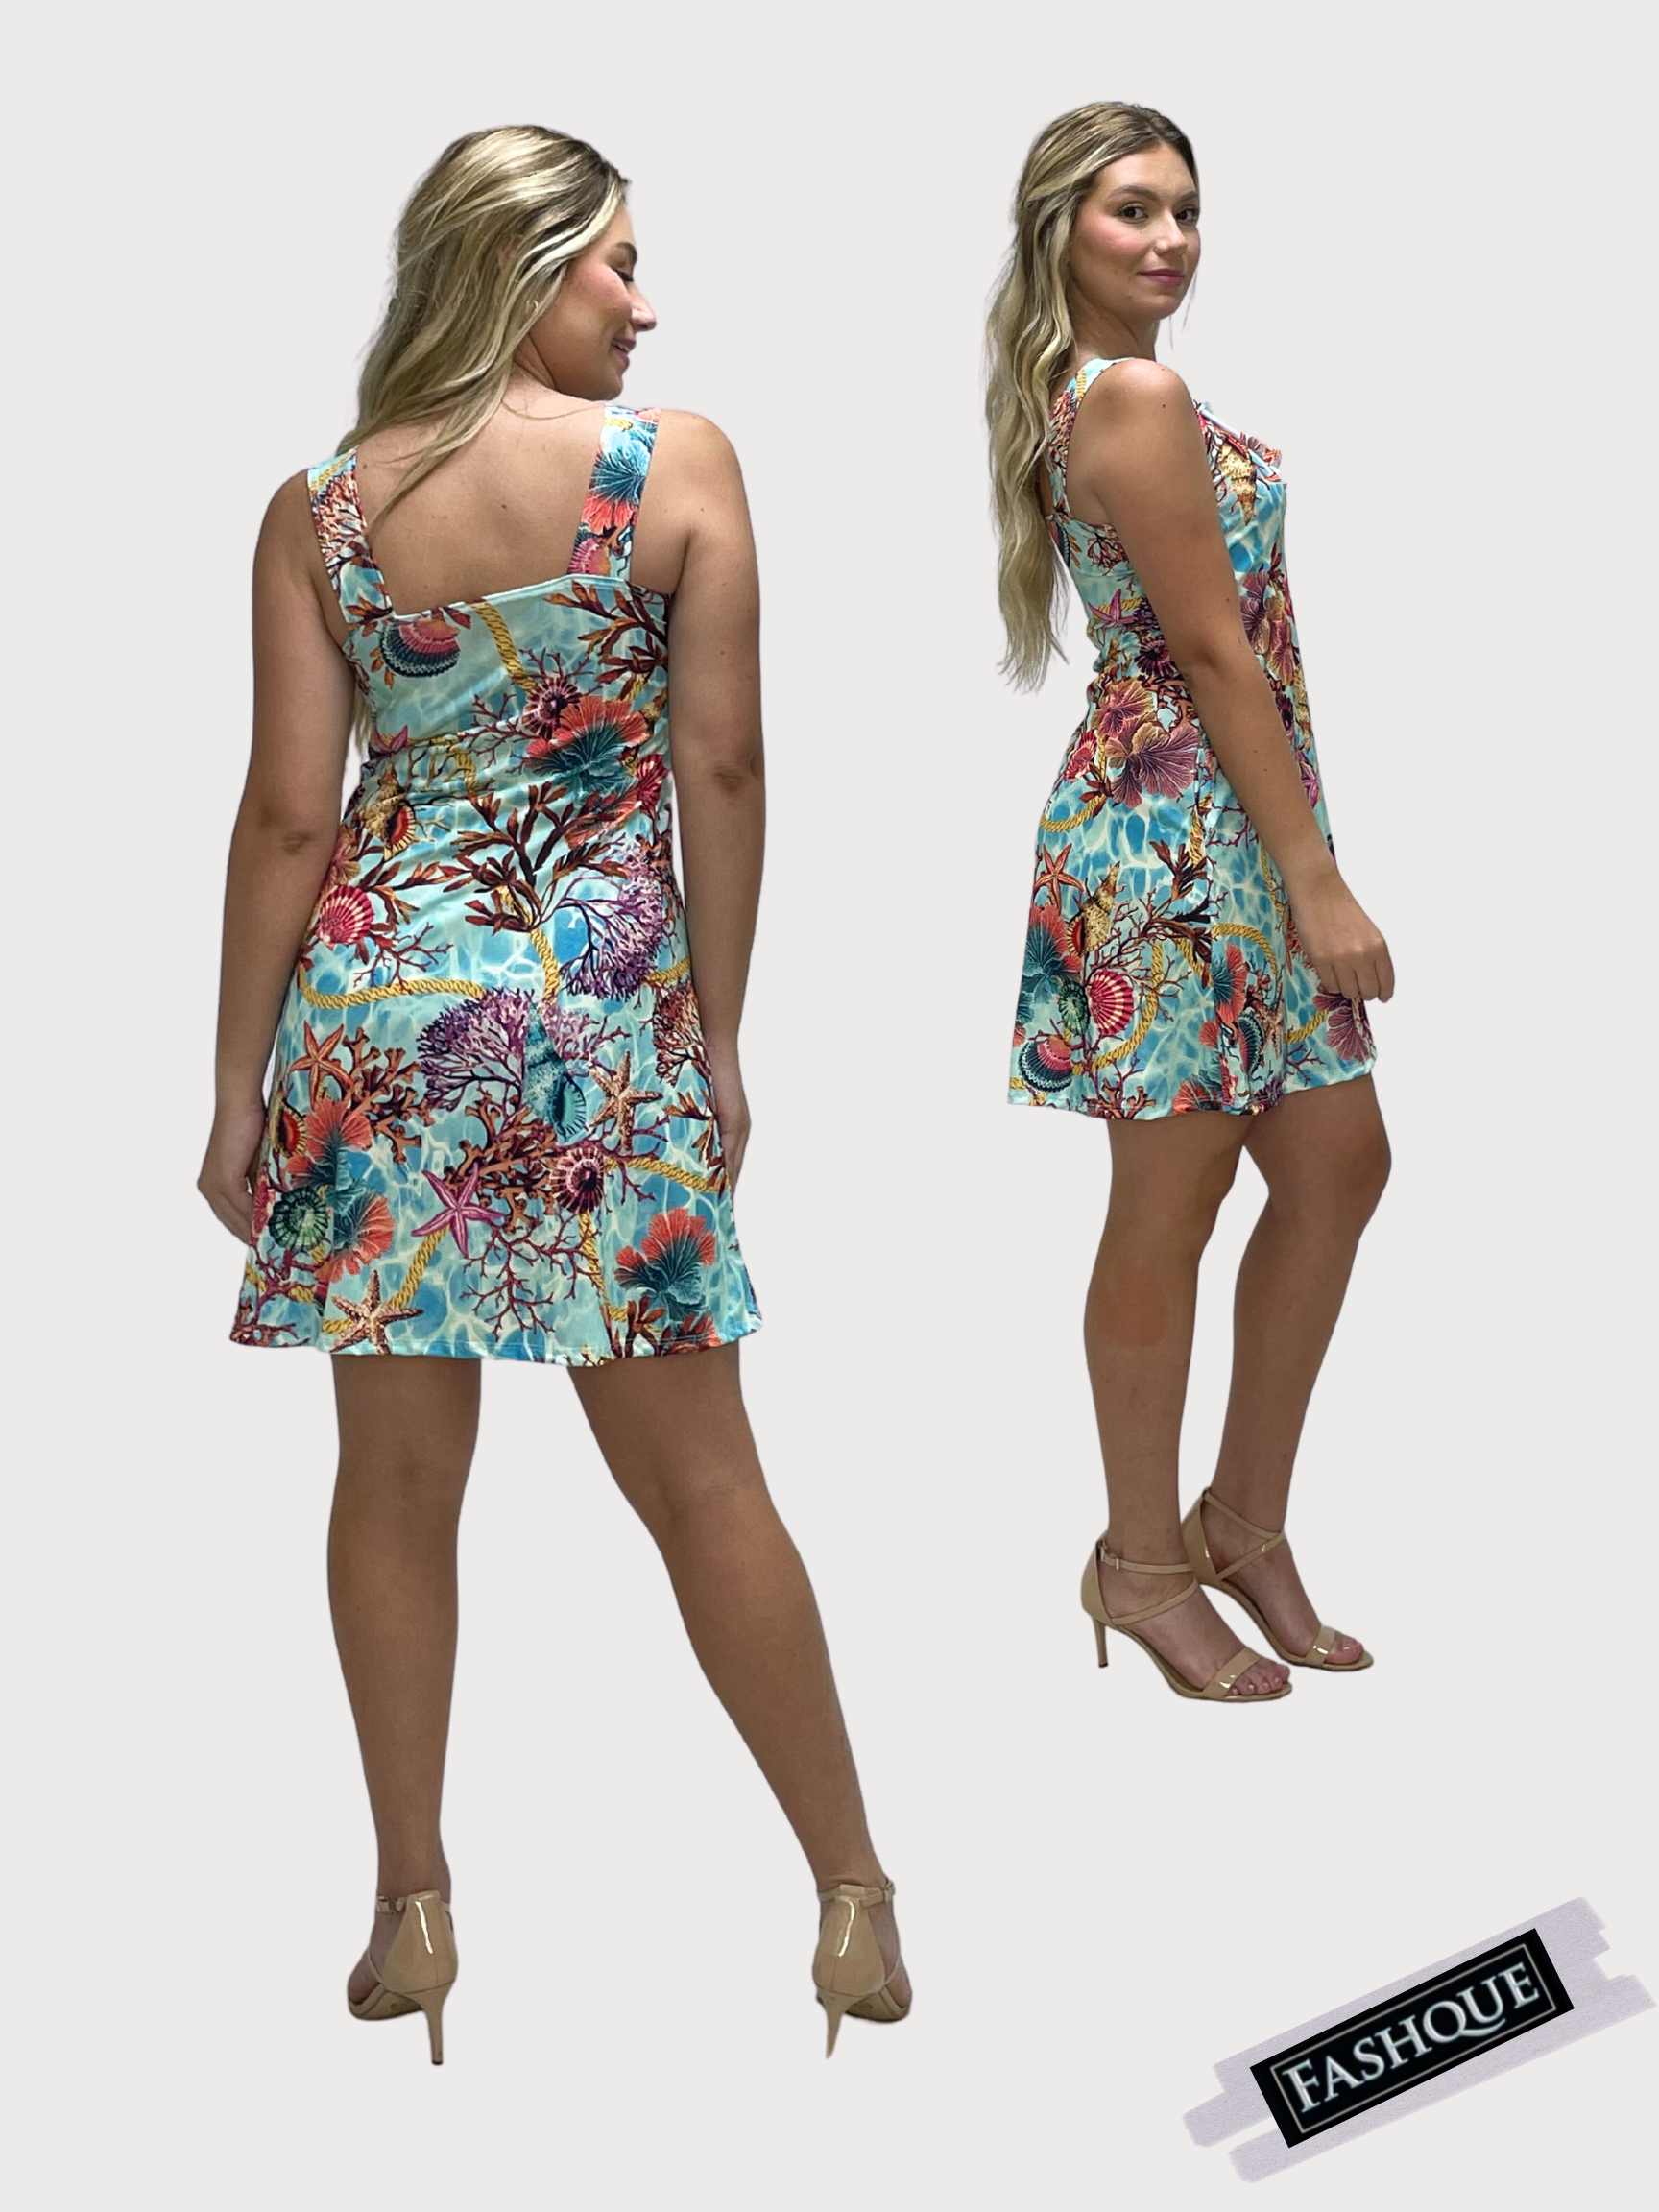 FASHQUE - Ruffle Neck Skater Style tank dress with square back and Pocket - D2006